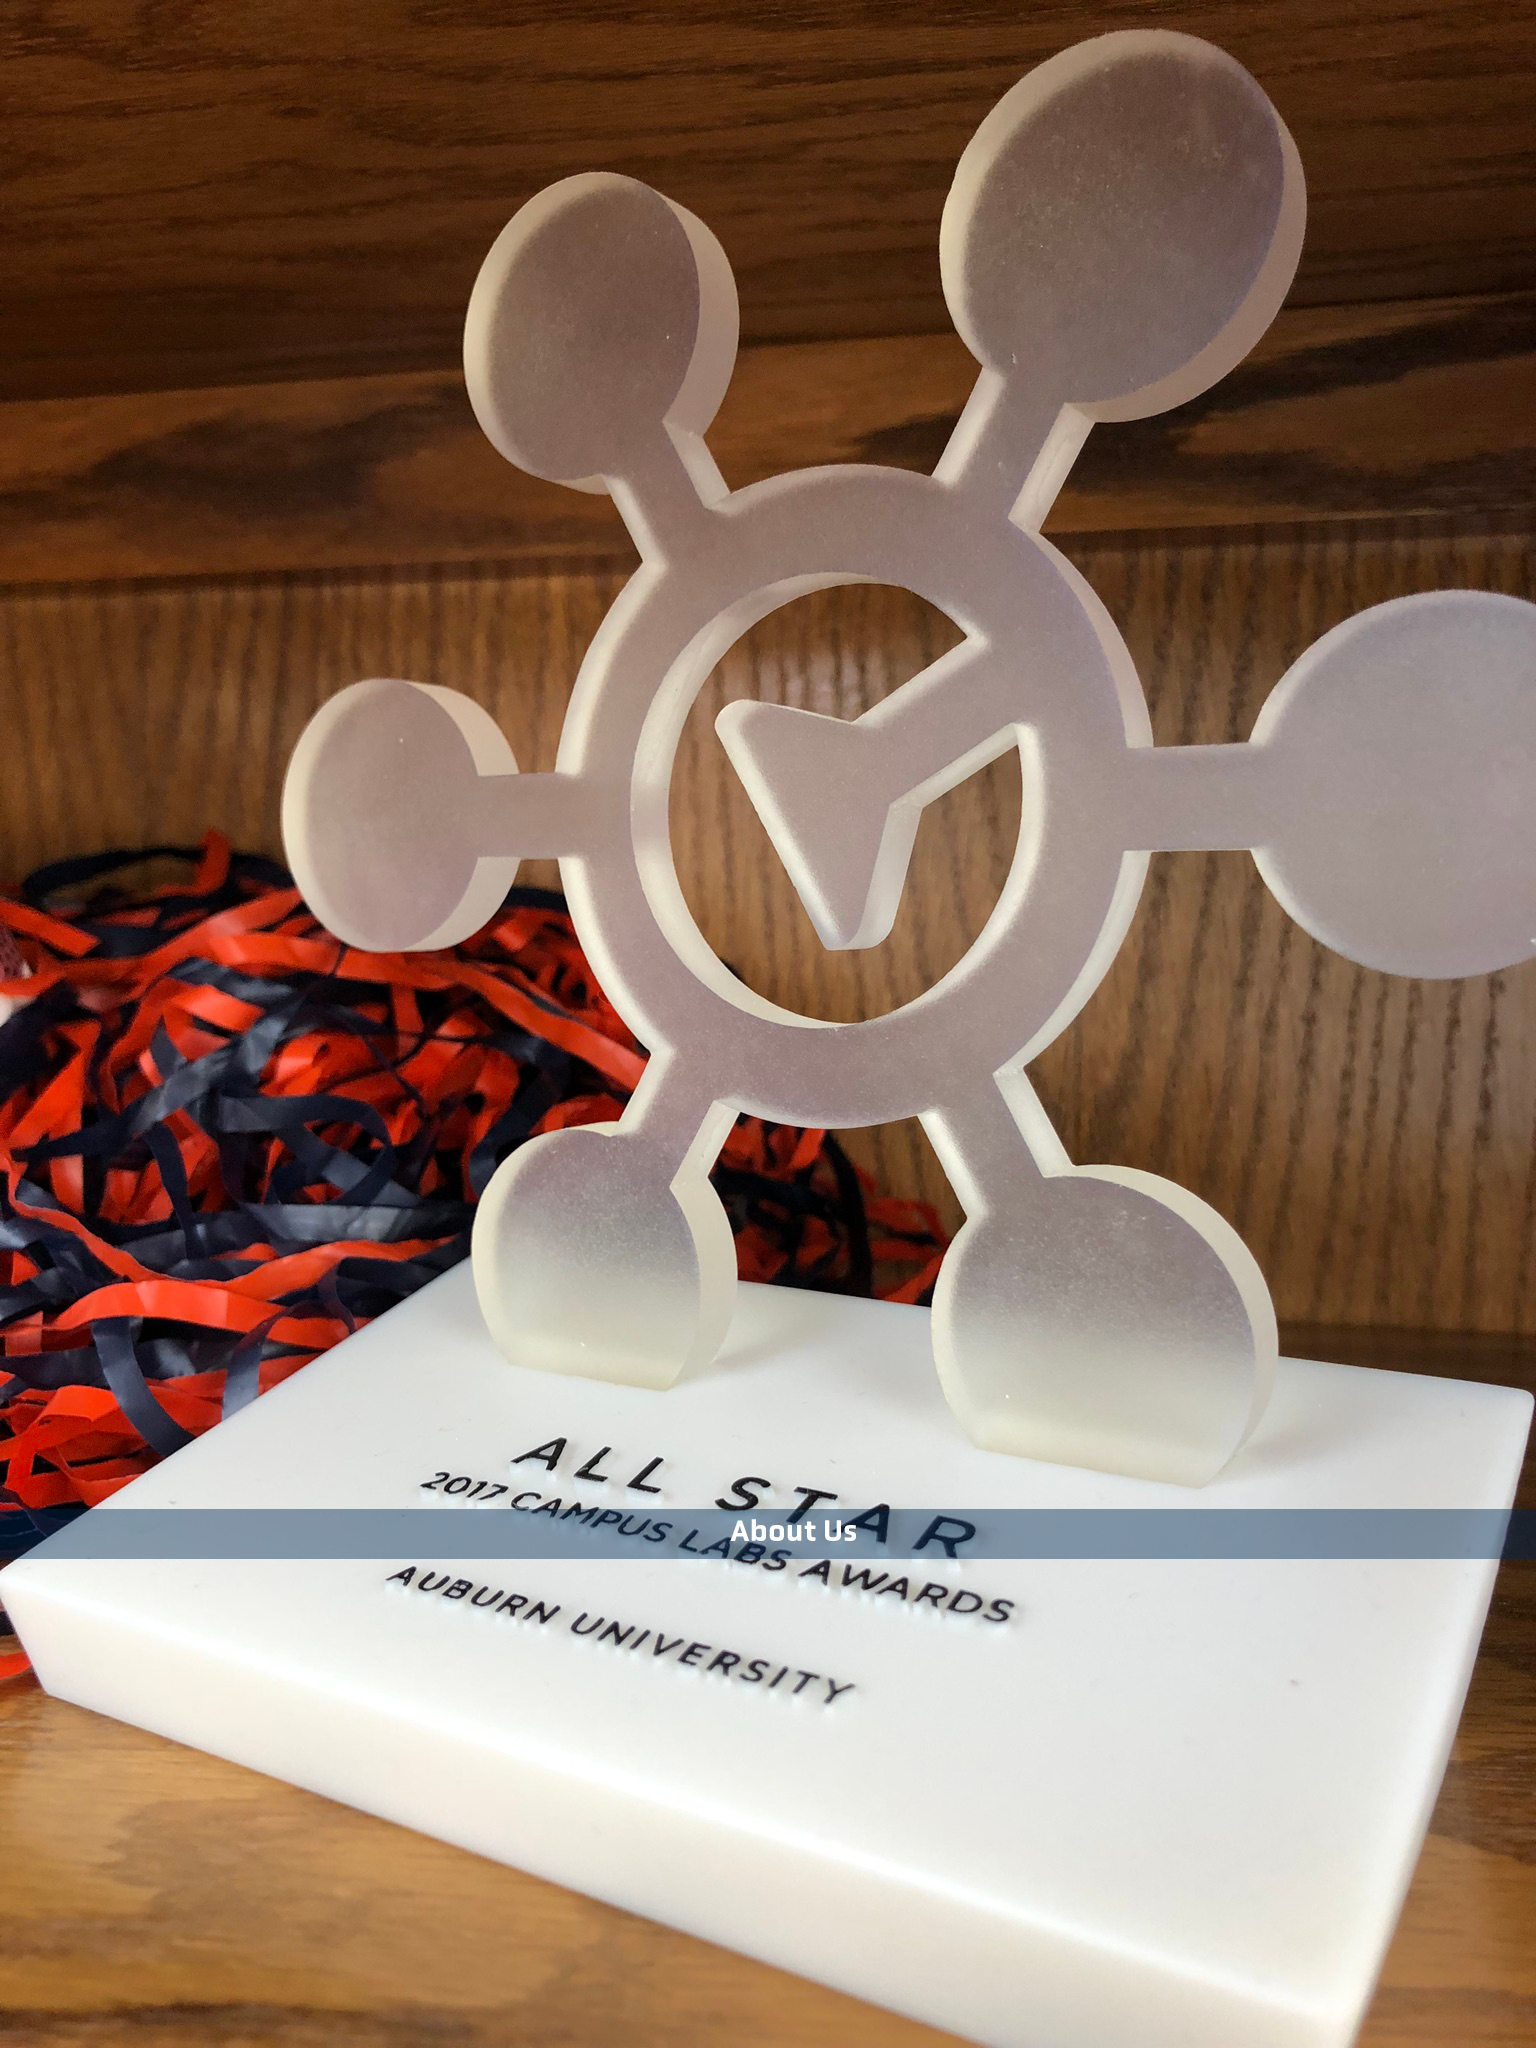 Photo of the Campus Labs Award given to Auburn University